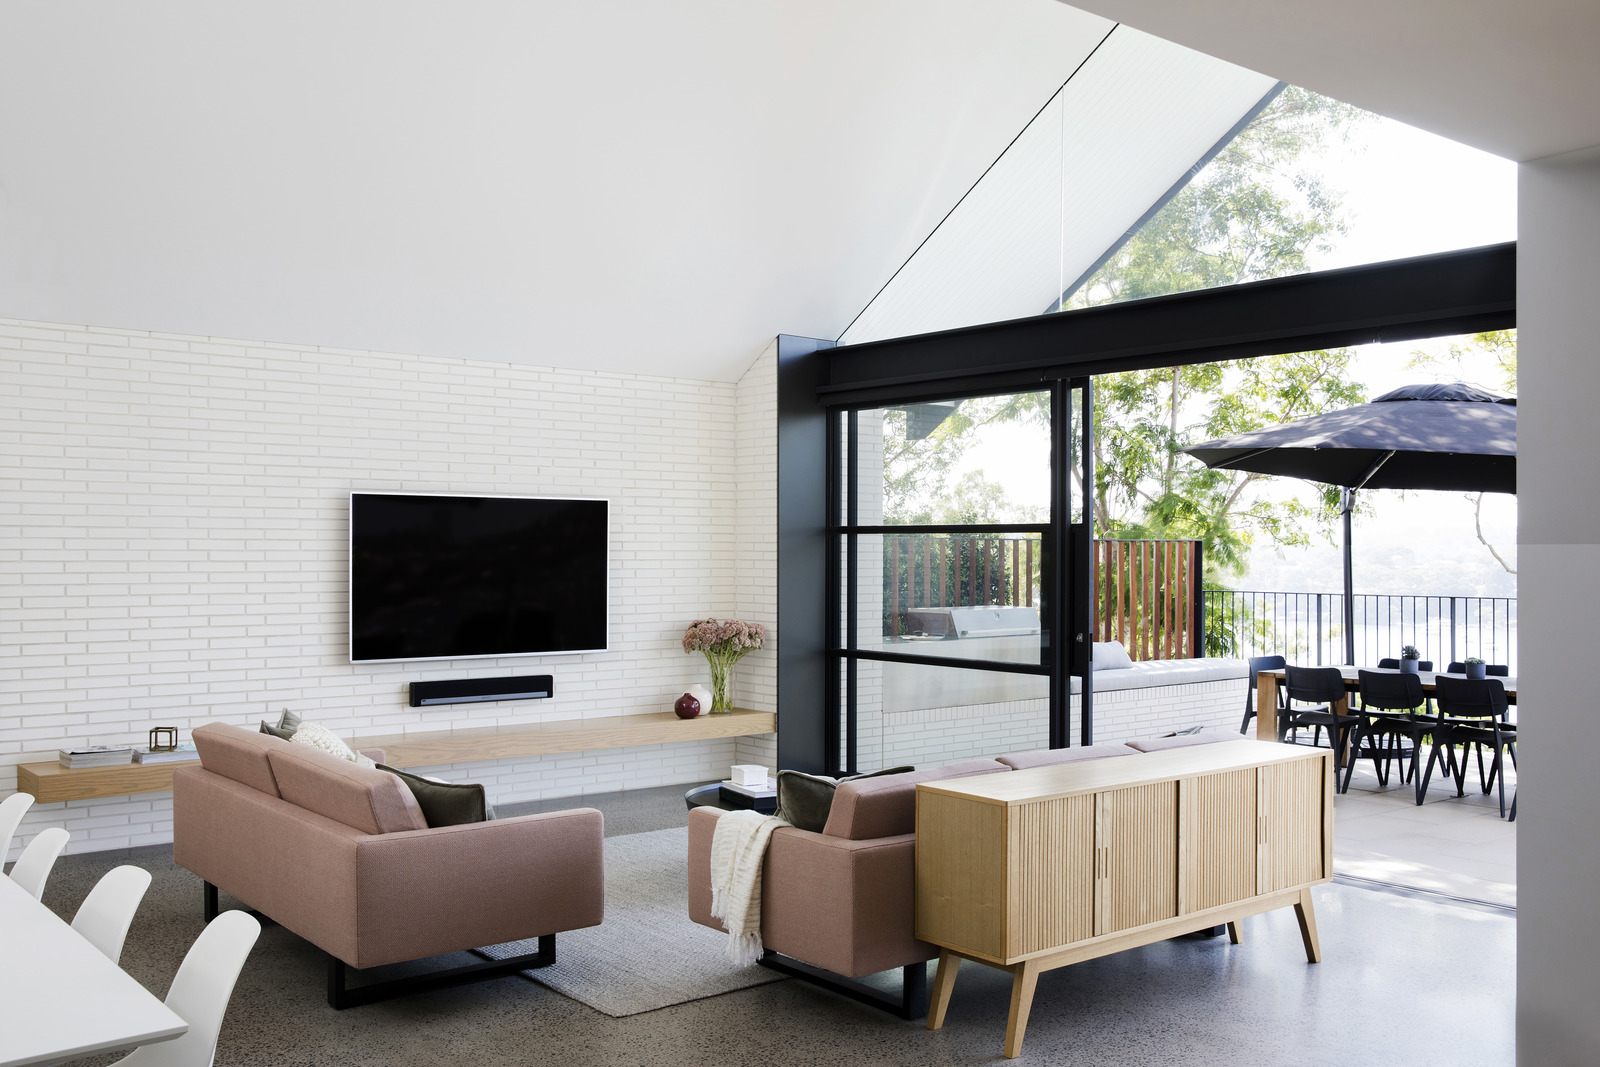 A living room with an exposed white brick interior with adjacent outdoor entertainment area.